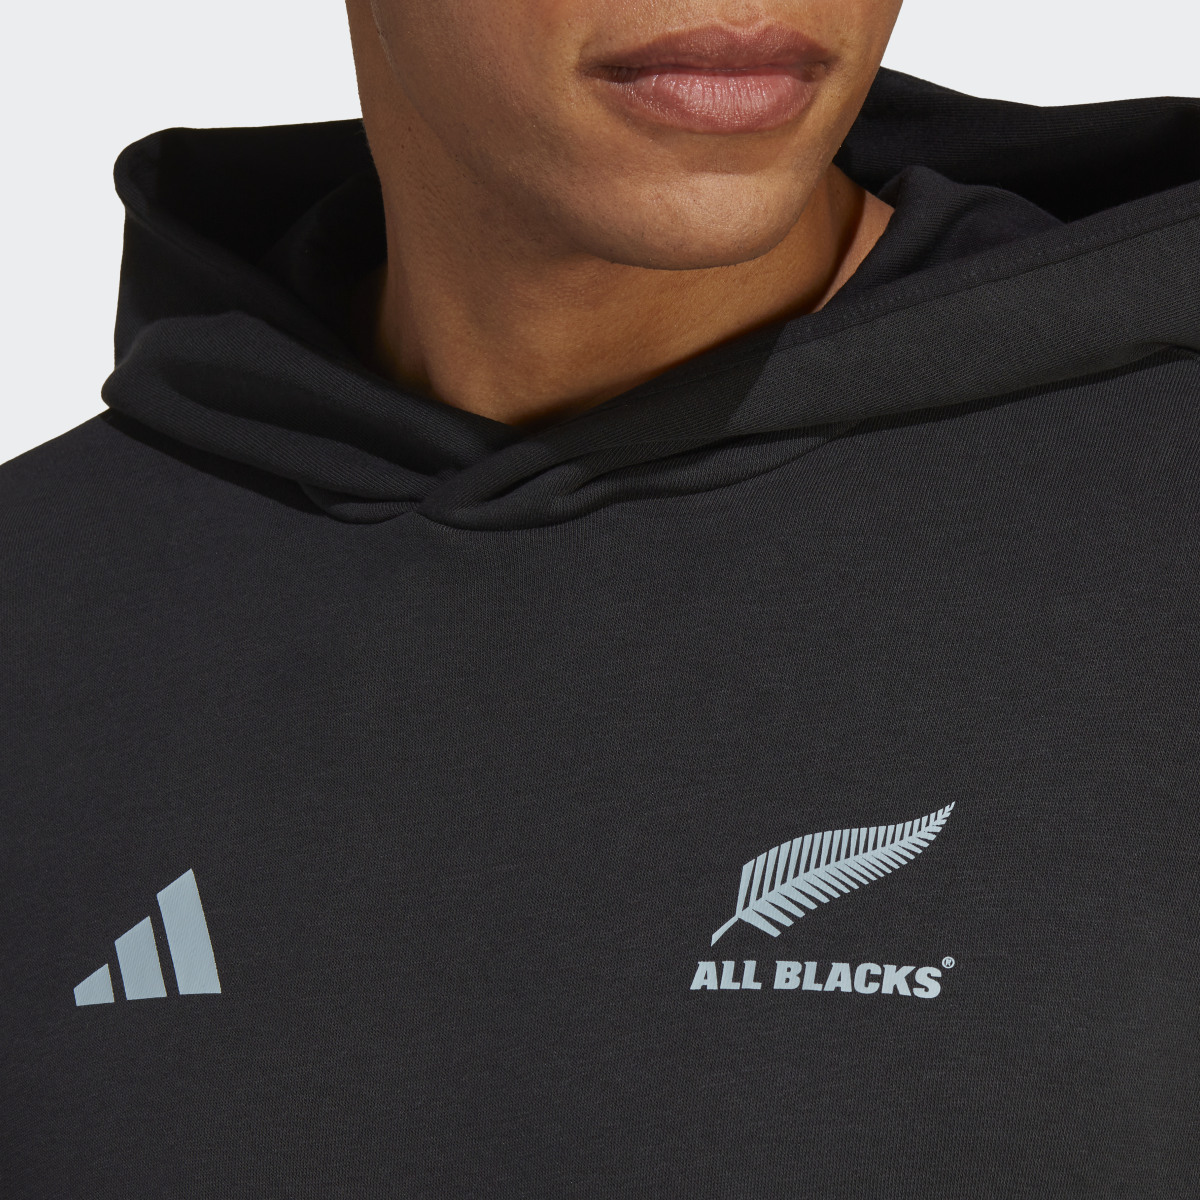 Adidas All Blacks Rugby Supporters Hoodie. 6